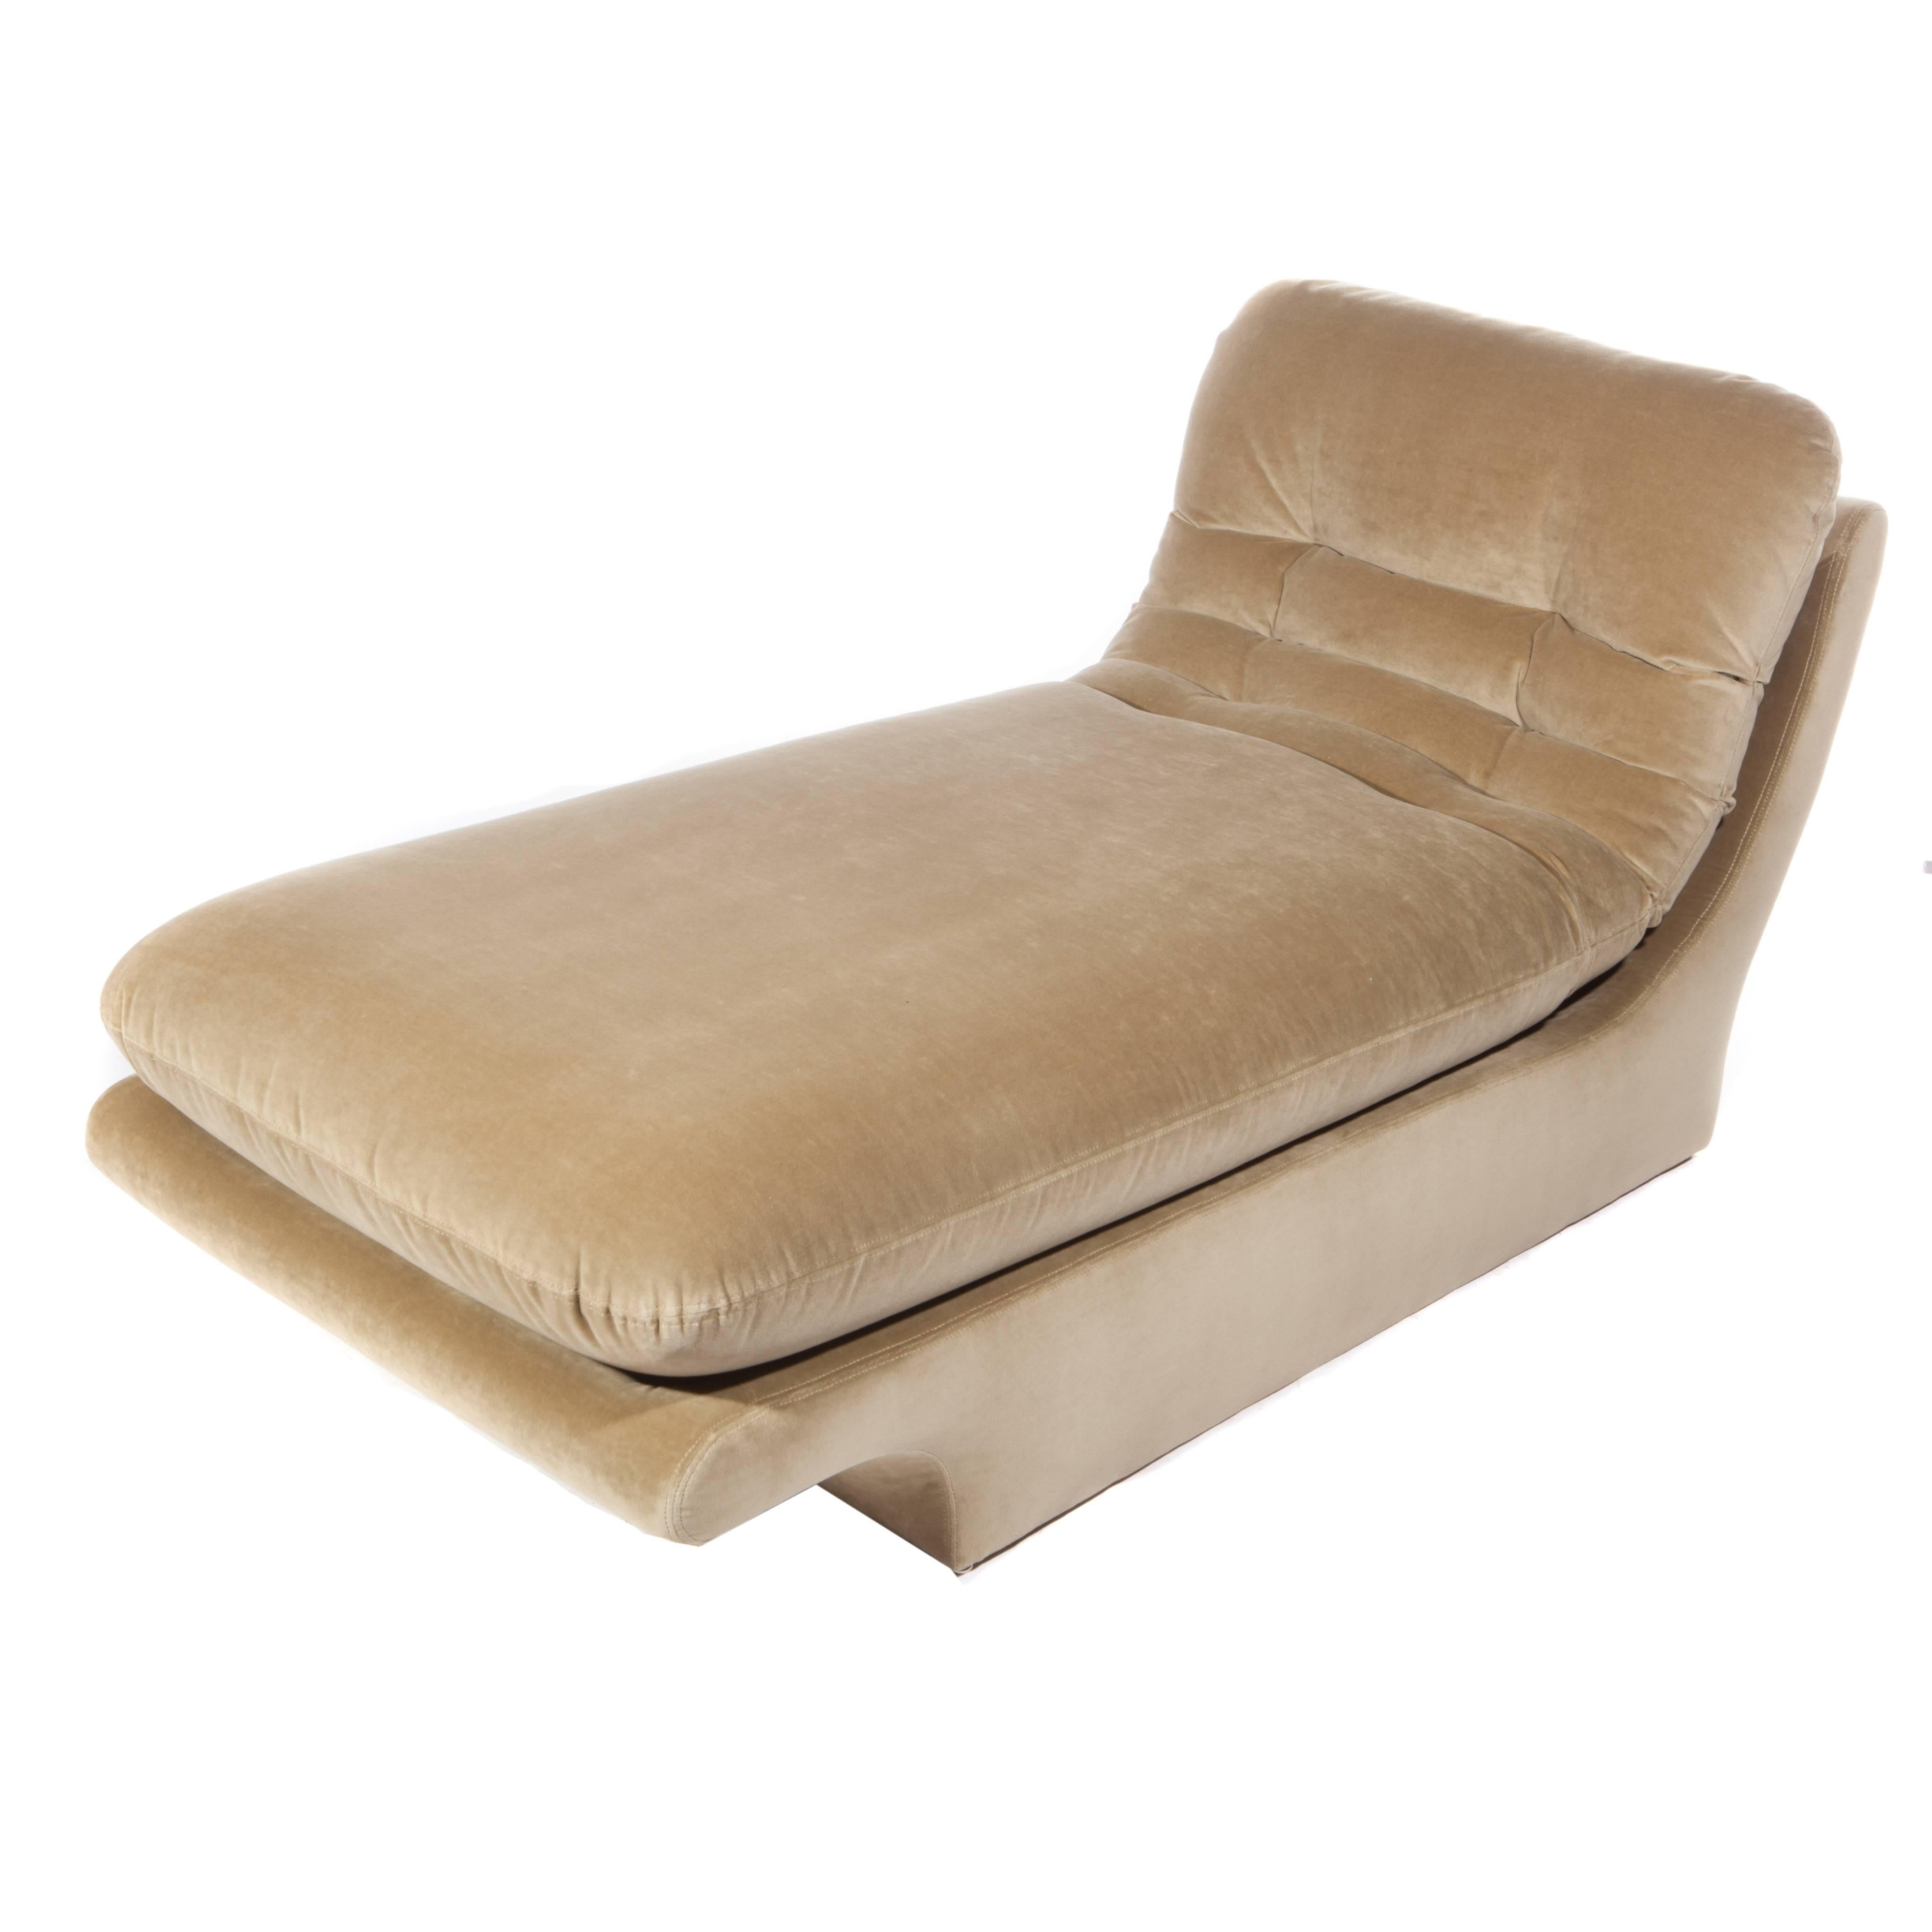 Fully Upholstered 1970s Chaise Lounge by Preview Furniture